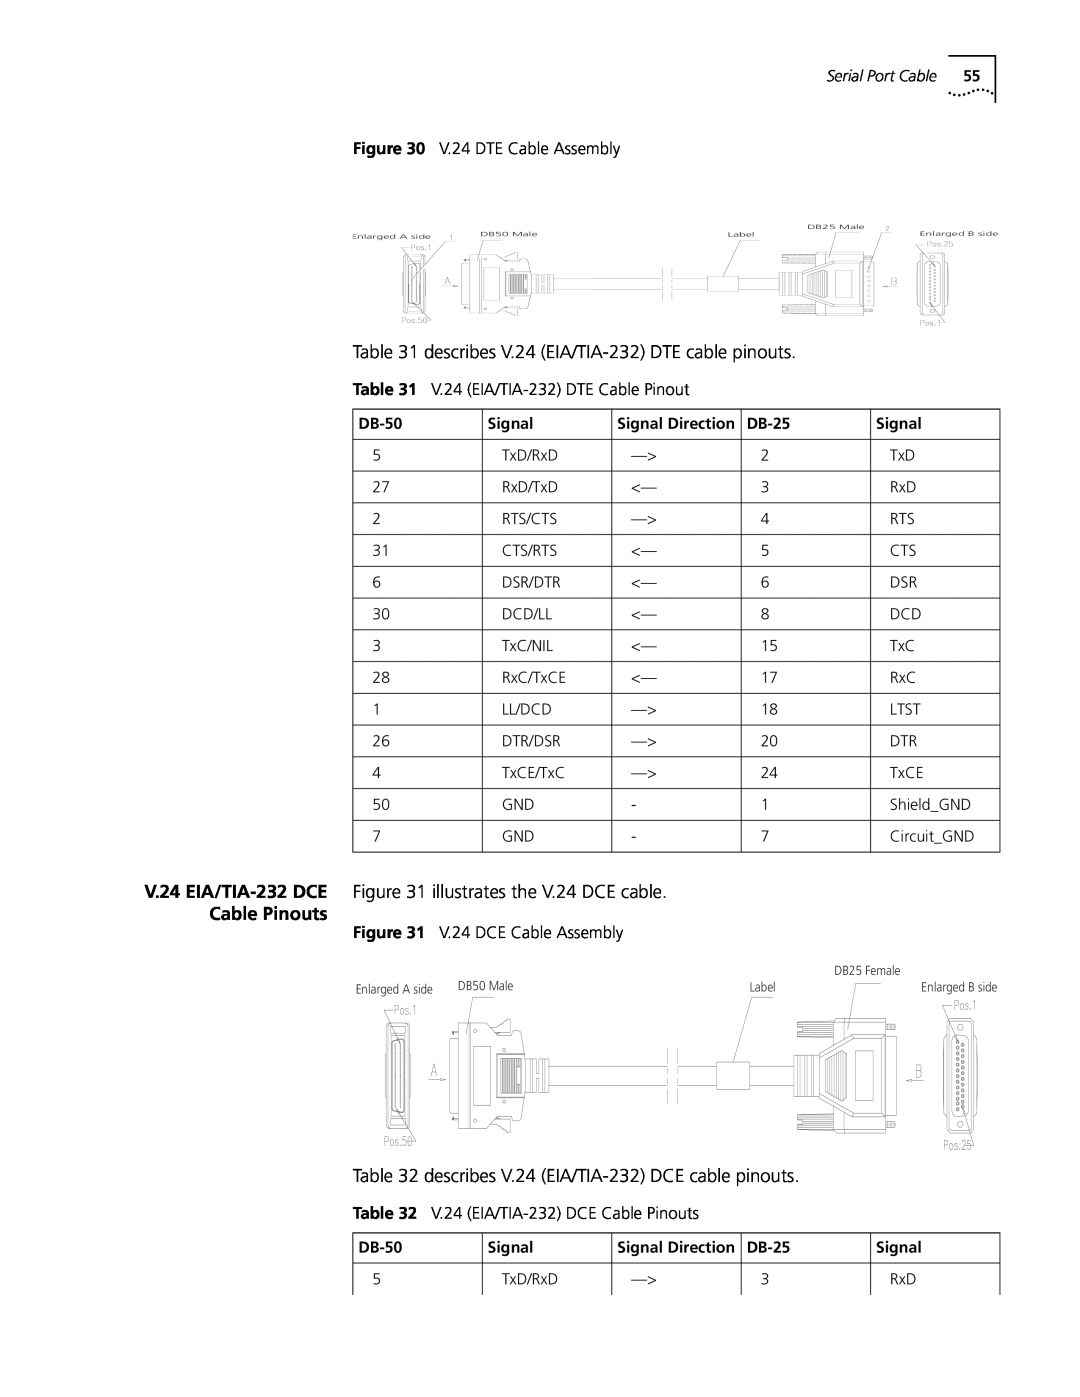 3Com 3015 (3C13615) Cable Pinouts, V.24 DTE Cable Assembly, V.24 EIA/TIA-232 DTE Cable Pinout, V.24 DCE Cable Assembly 